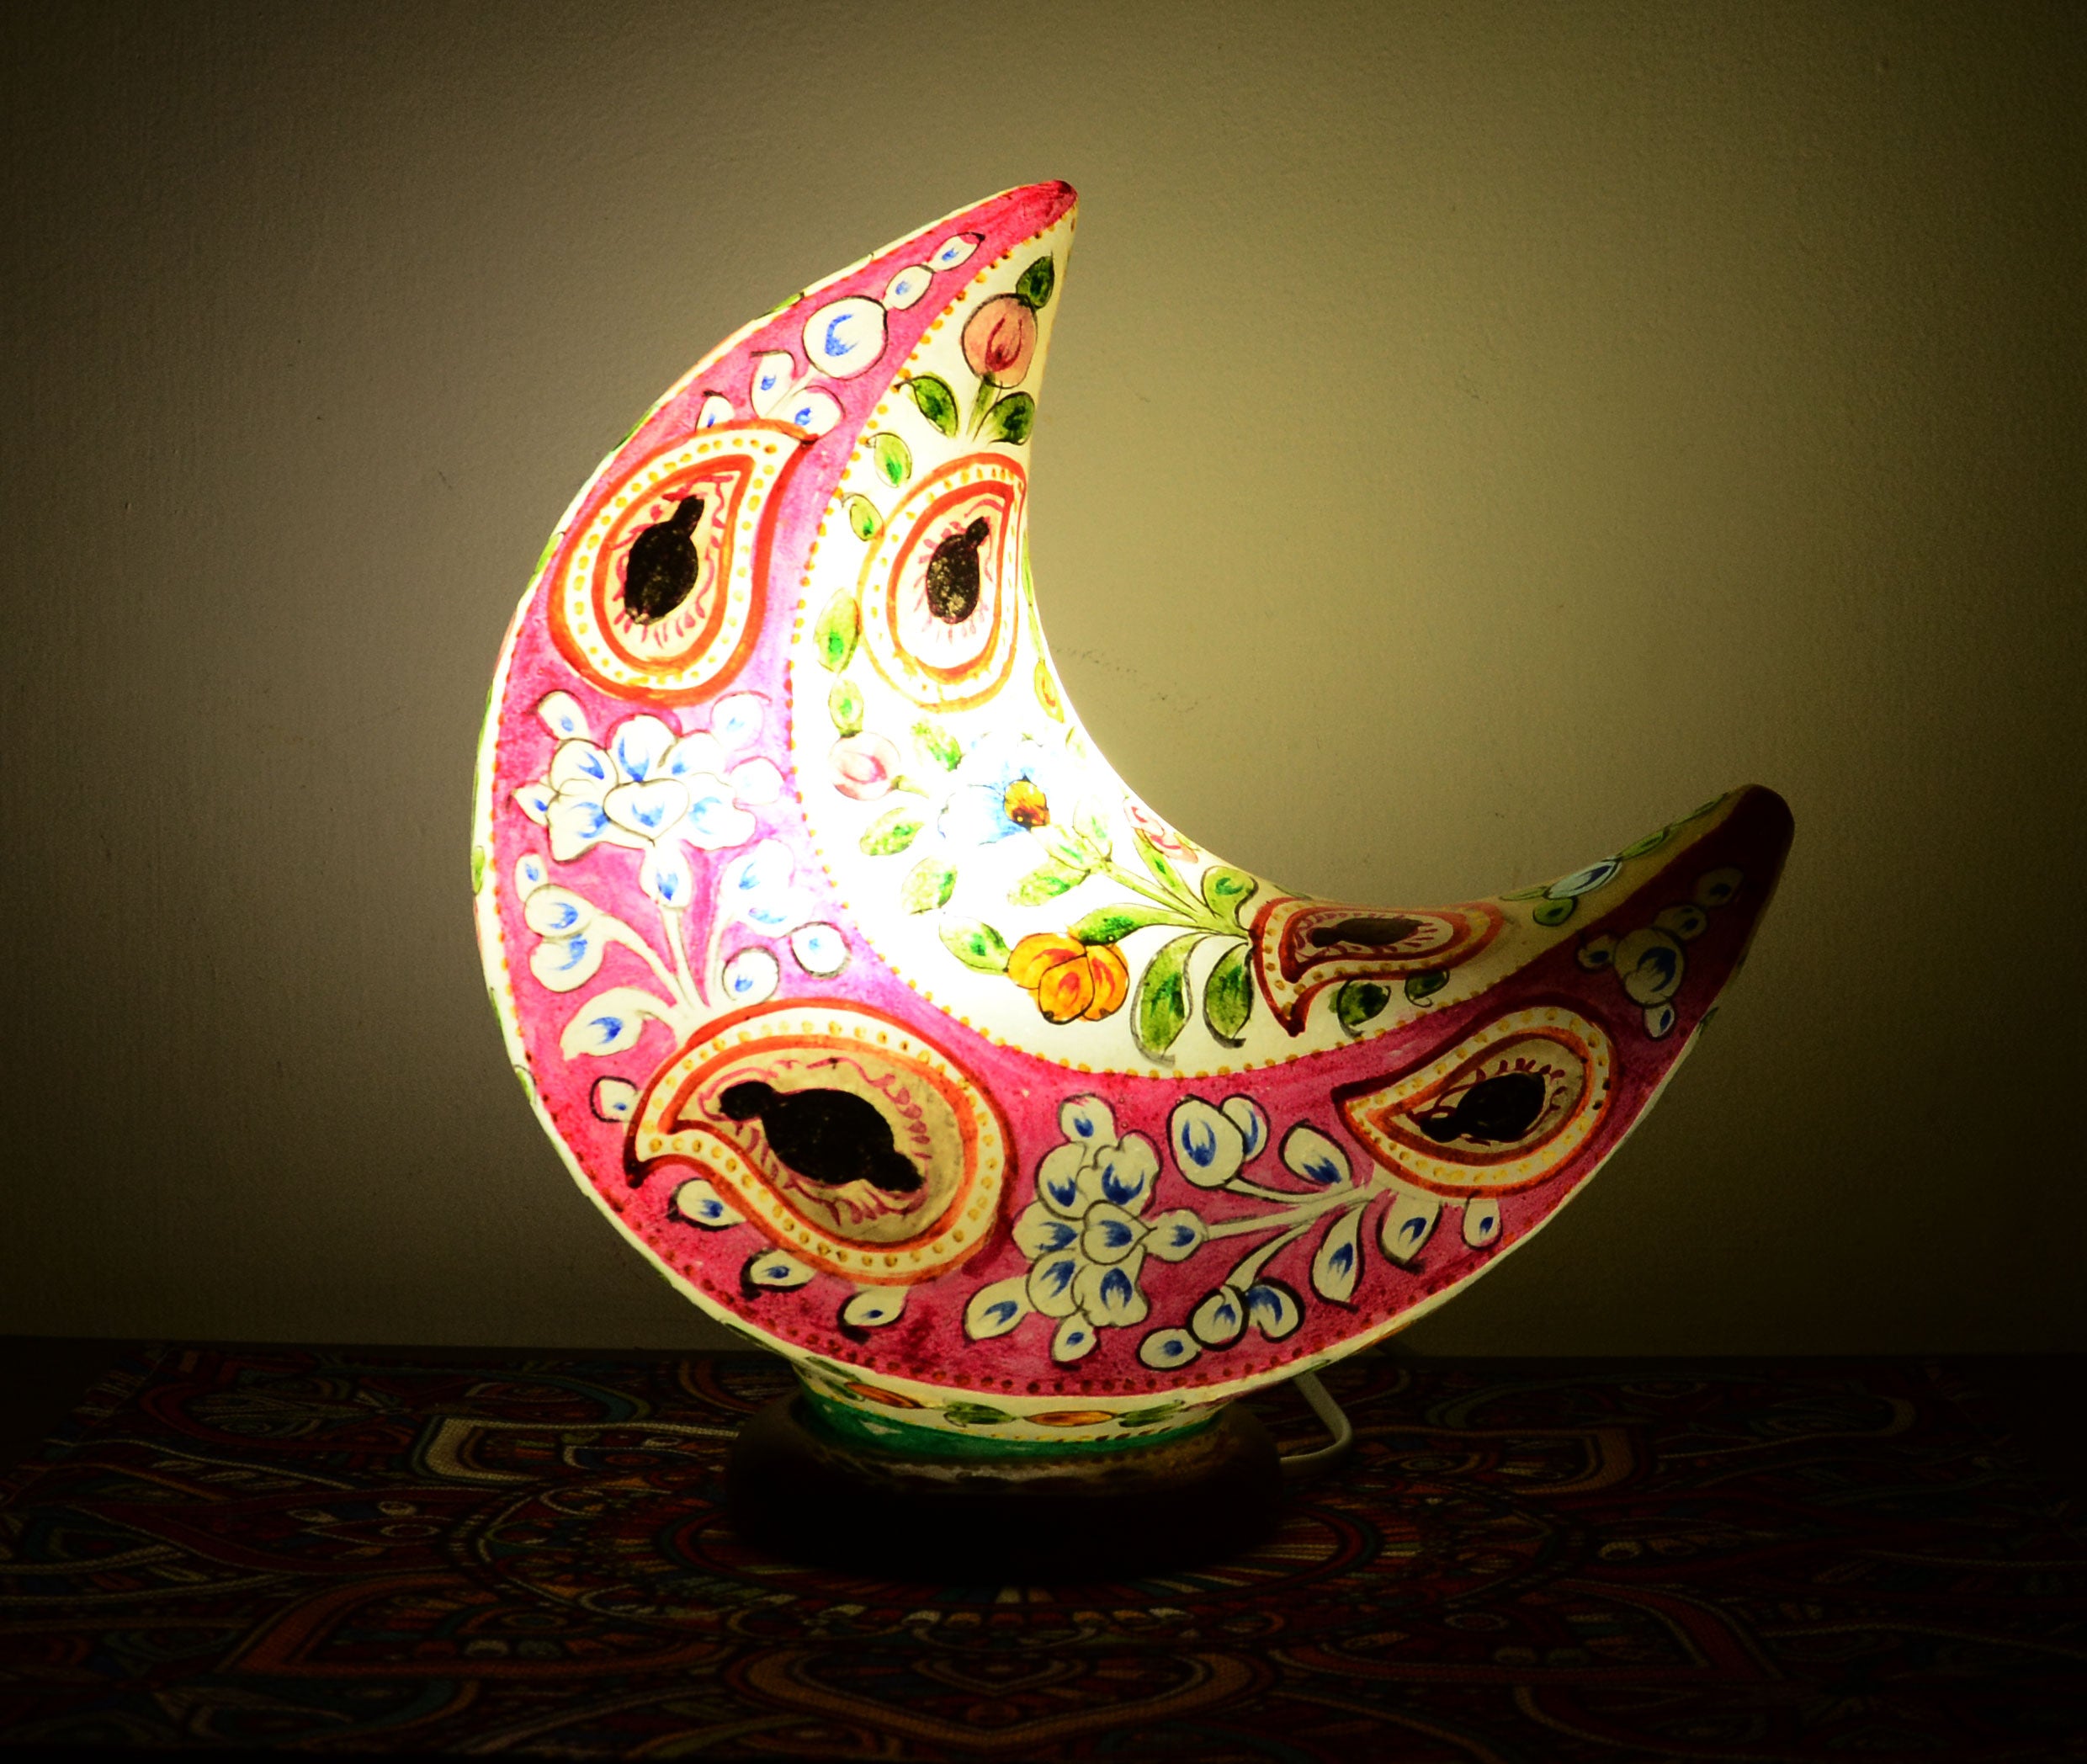 Exquisite Multi-Color Star Shape Camel Skin Lamp with Intricate Naqashi Art